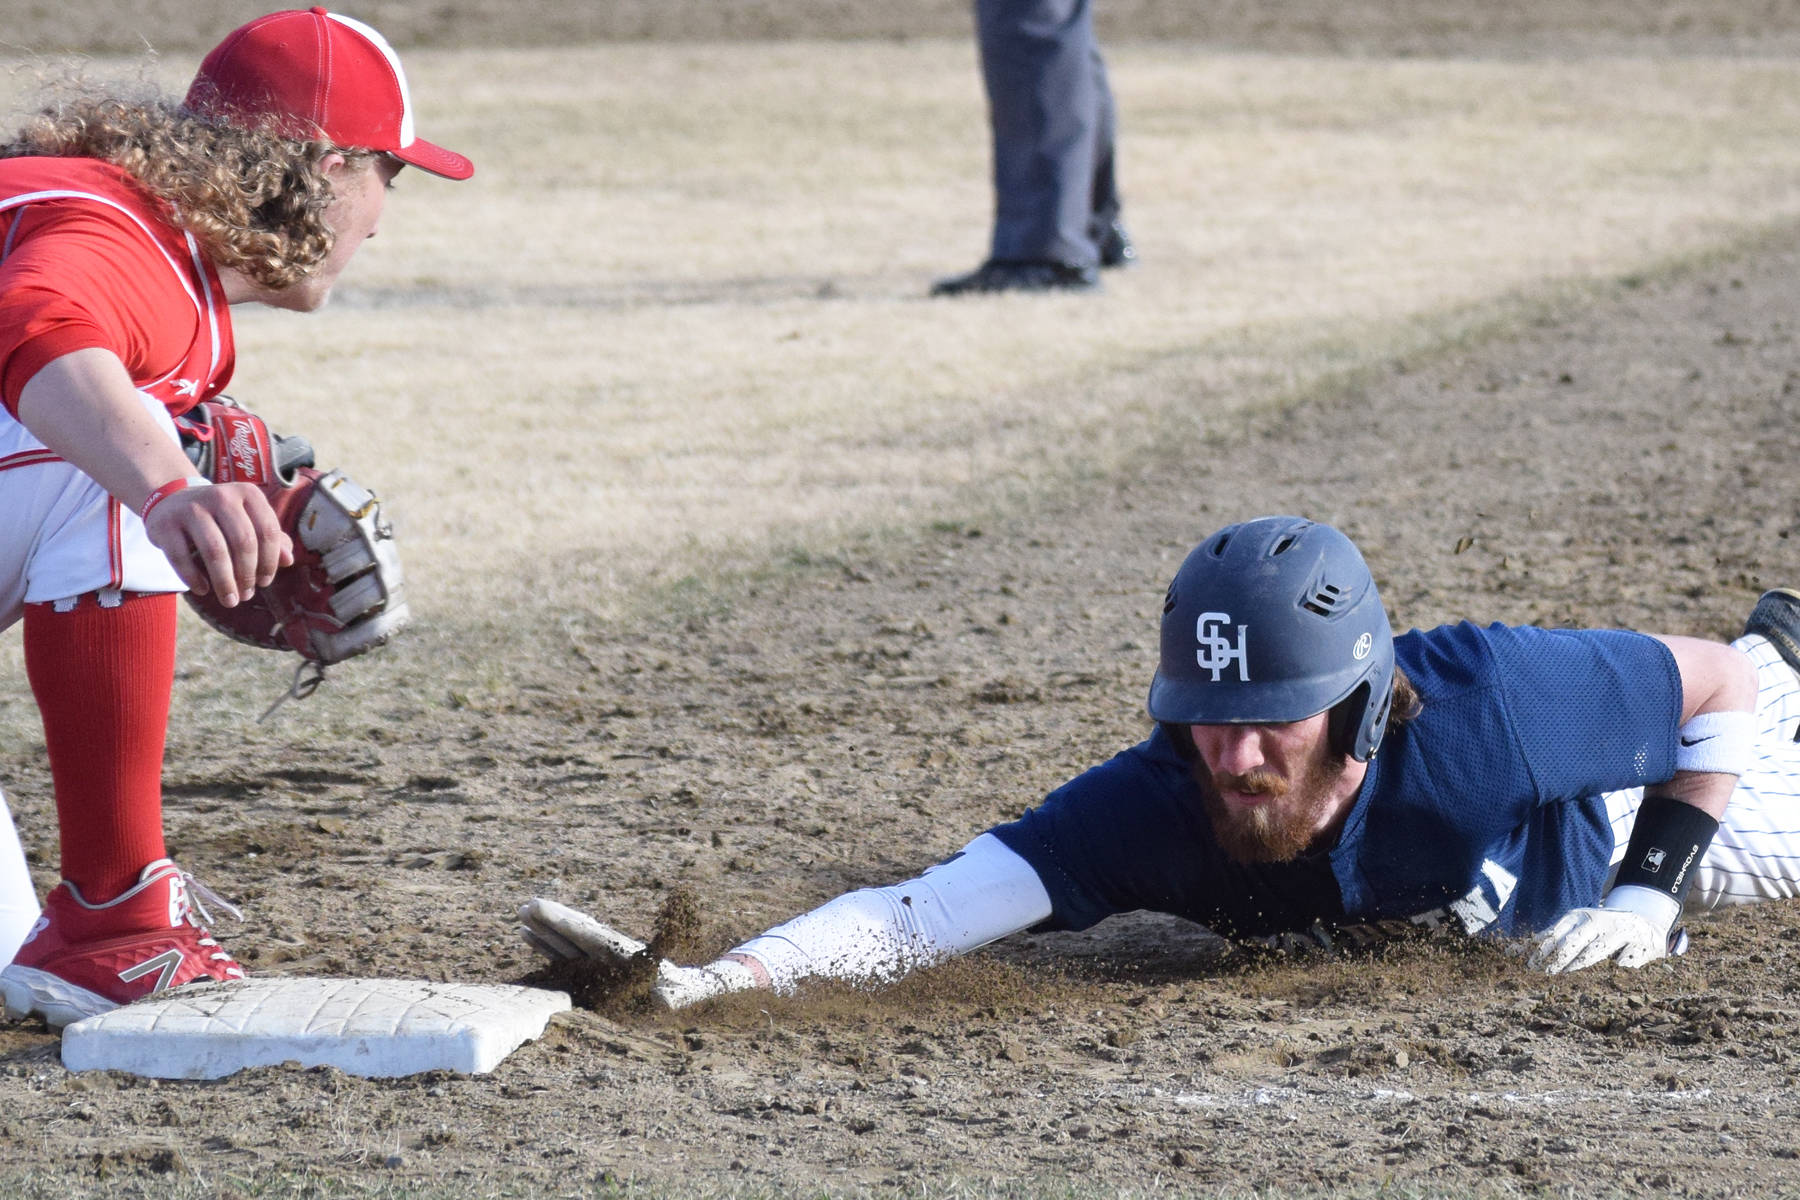 Soldotna’s David Michael tags first base ahead of Wasilla’s Clancy O’Donnell in a Southcentral Conference contest Thursday, May 2, 2019, at the Soldotna Baseball Fields. (Photo by Joey Klecka/Peninsula Clarion)